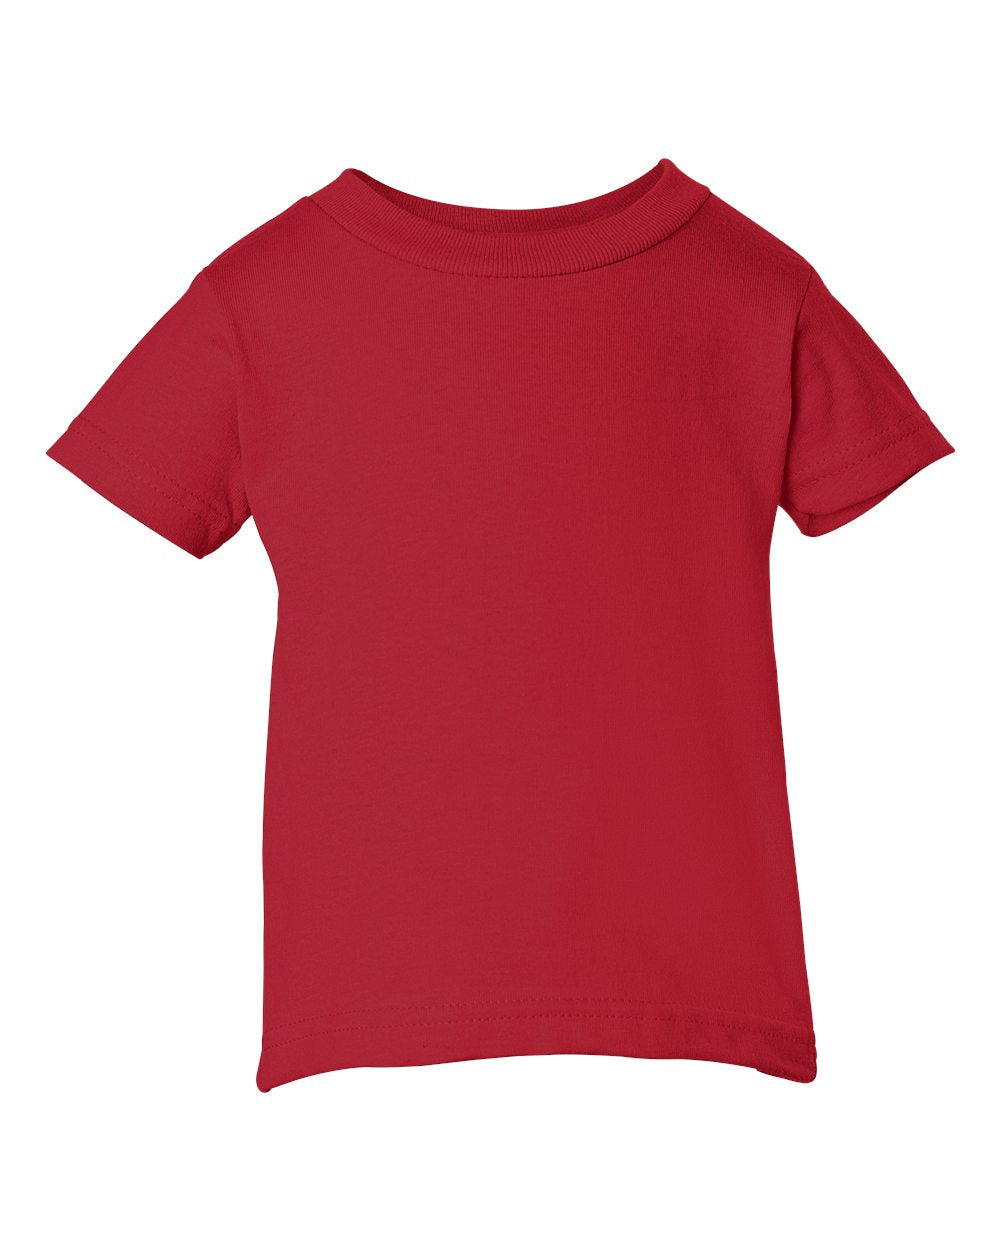 rabbit skins infant cotton jersey tee red